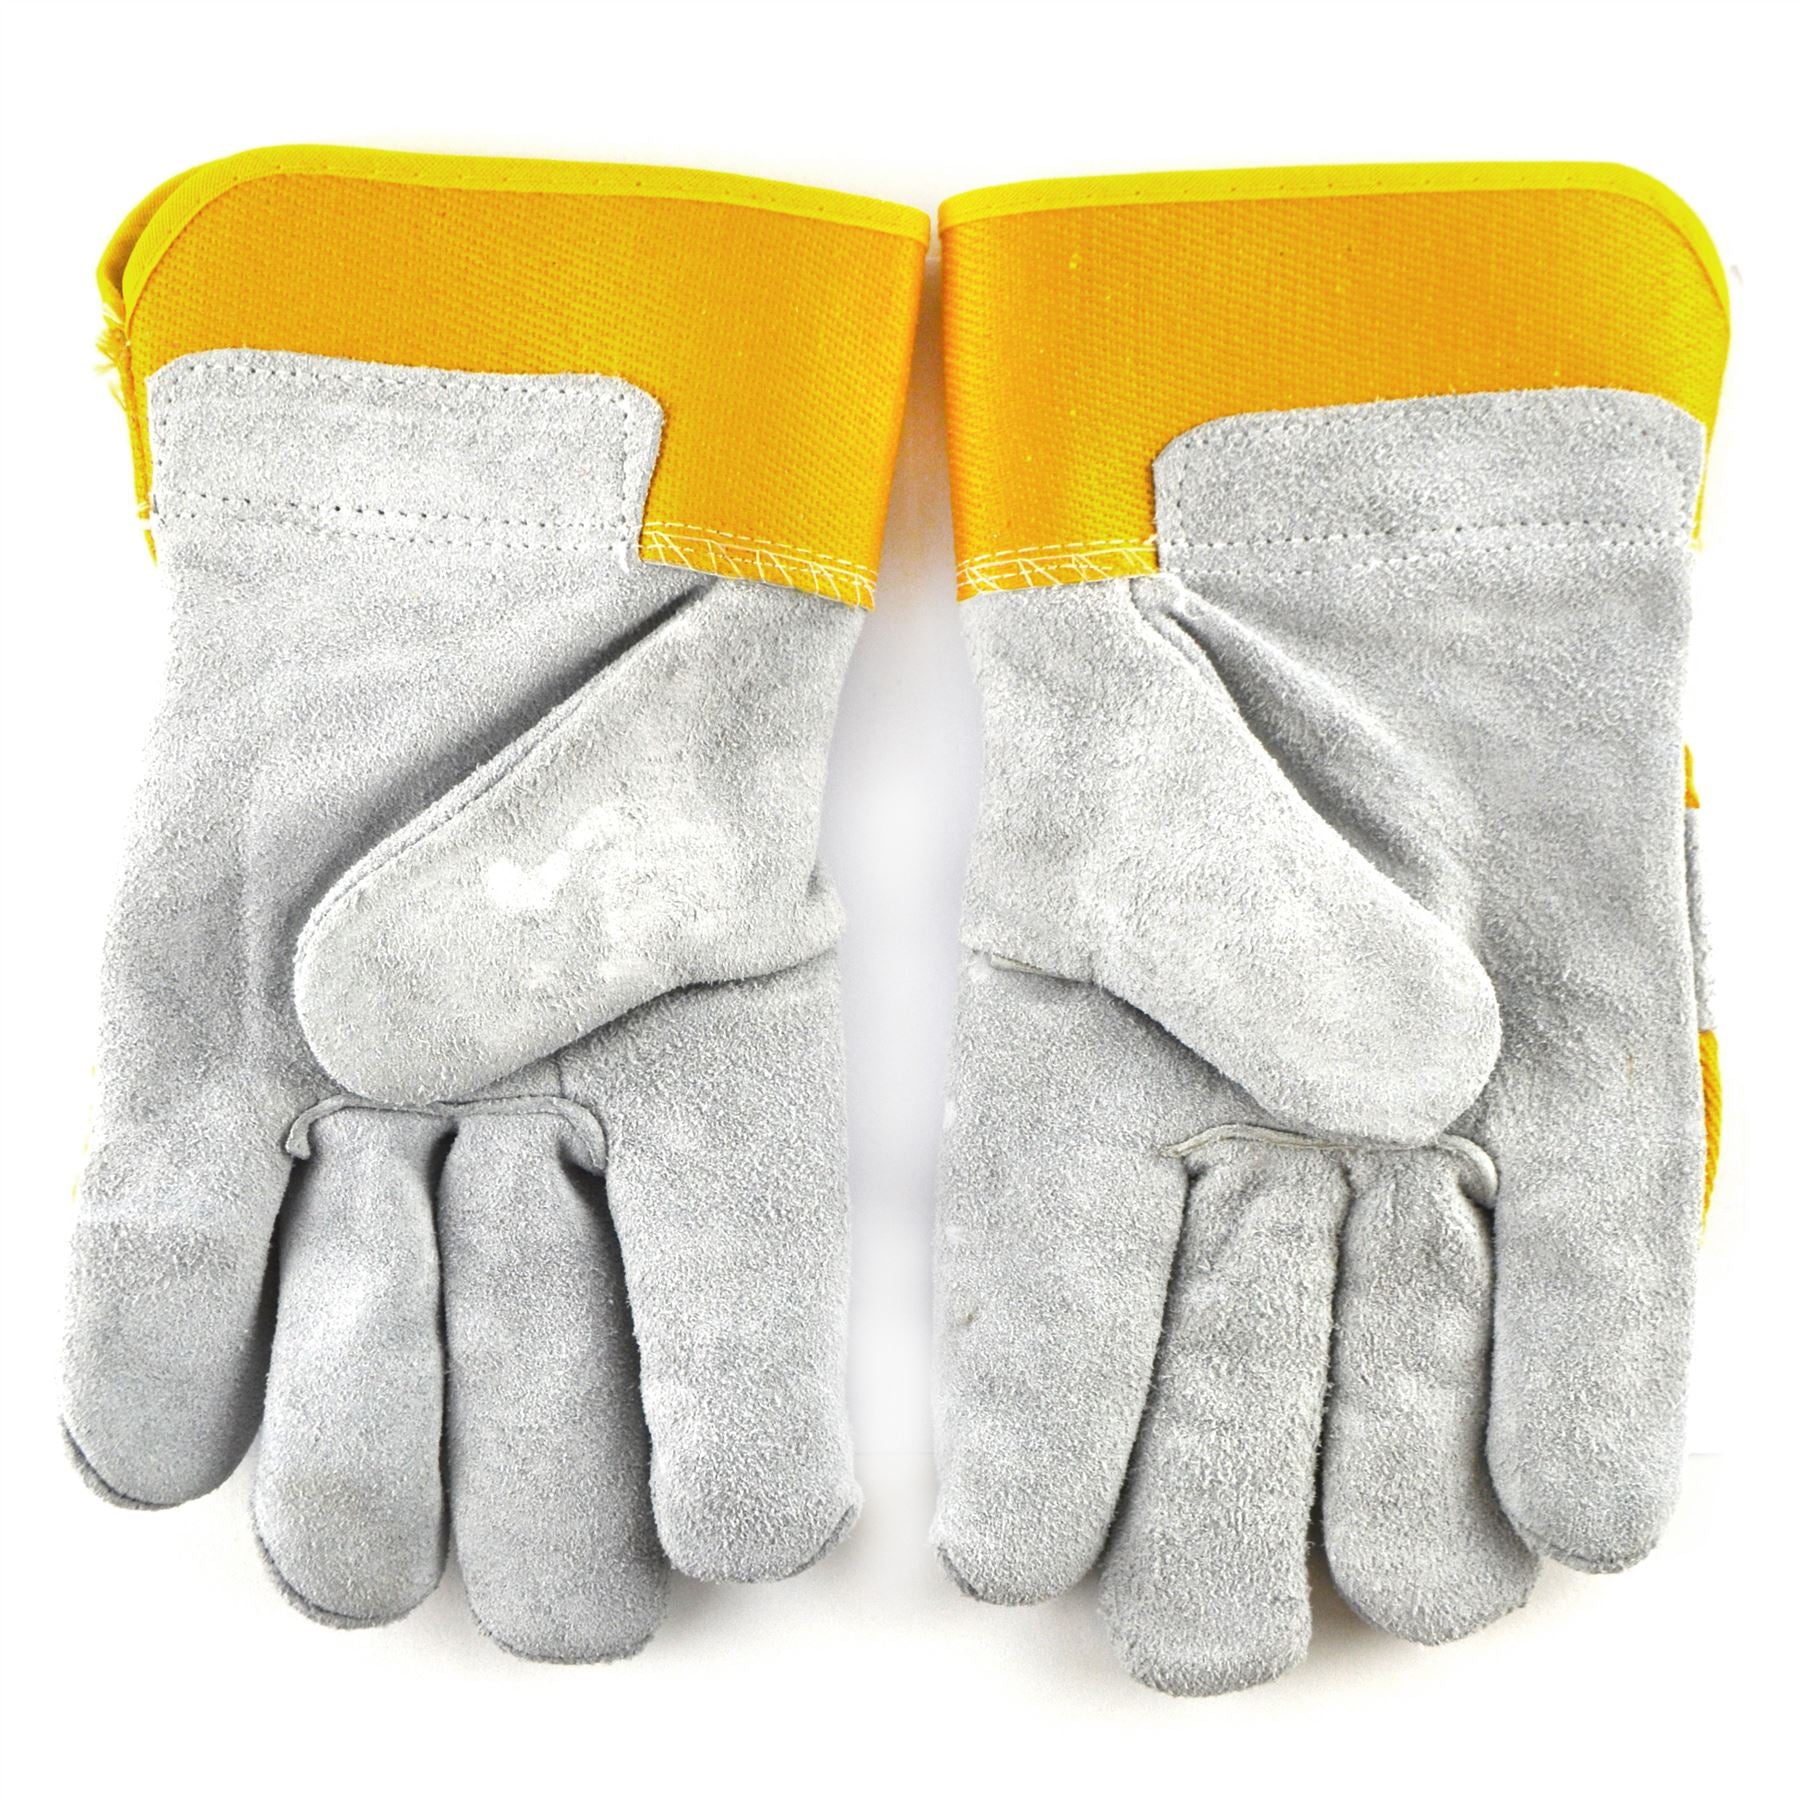 Leather Work Gloves 10.5'' Protective Wear Safety Builders Cuff Fleece Lining TE940